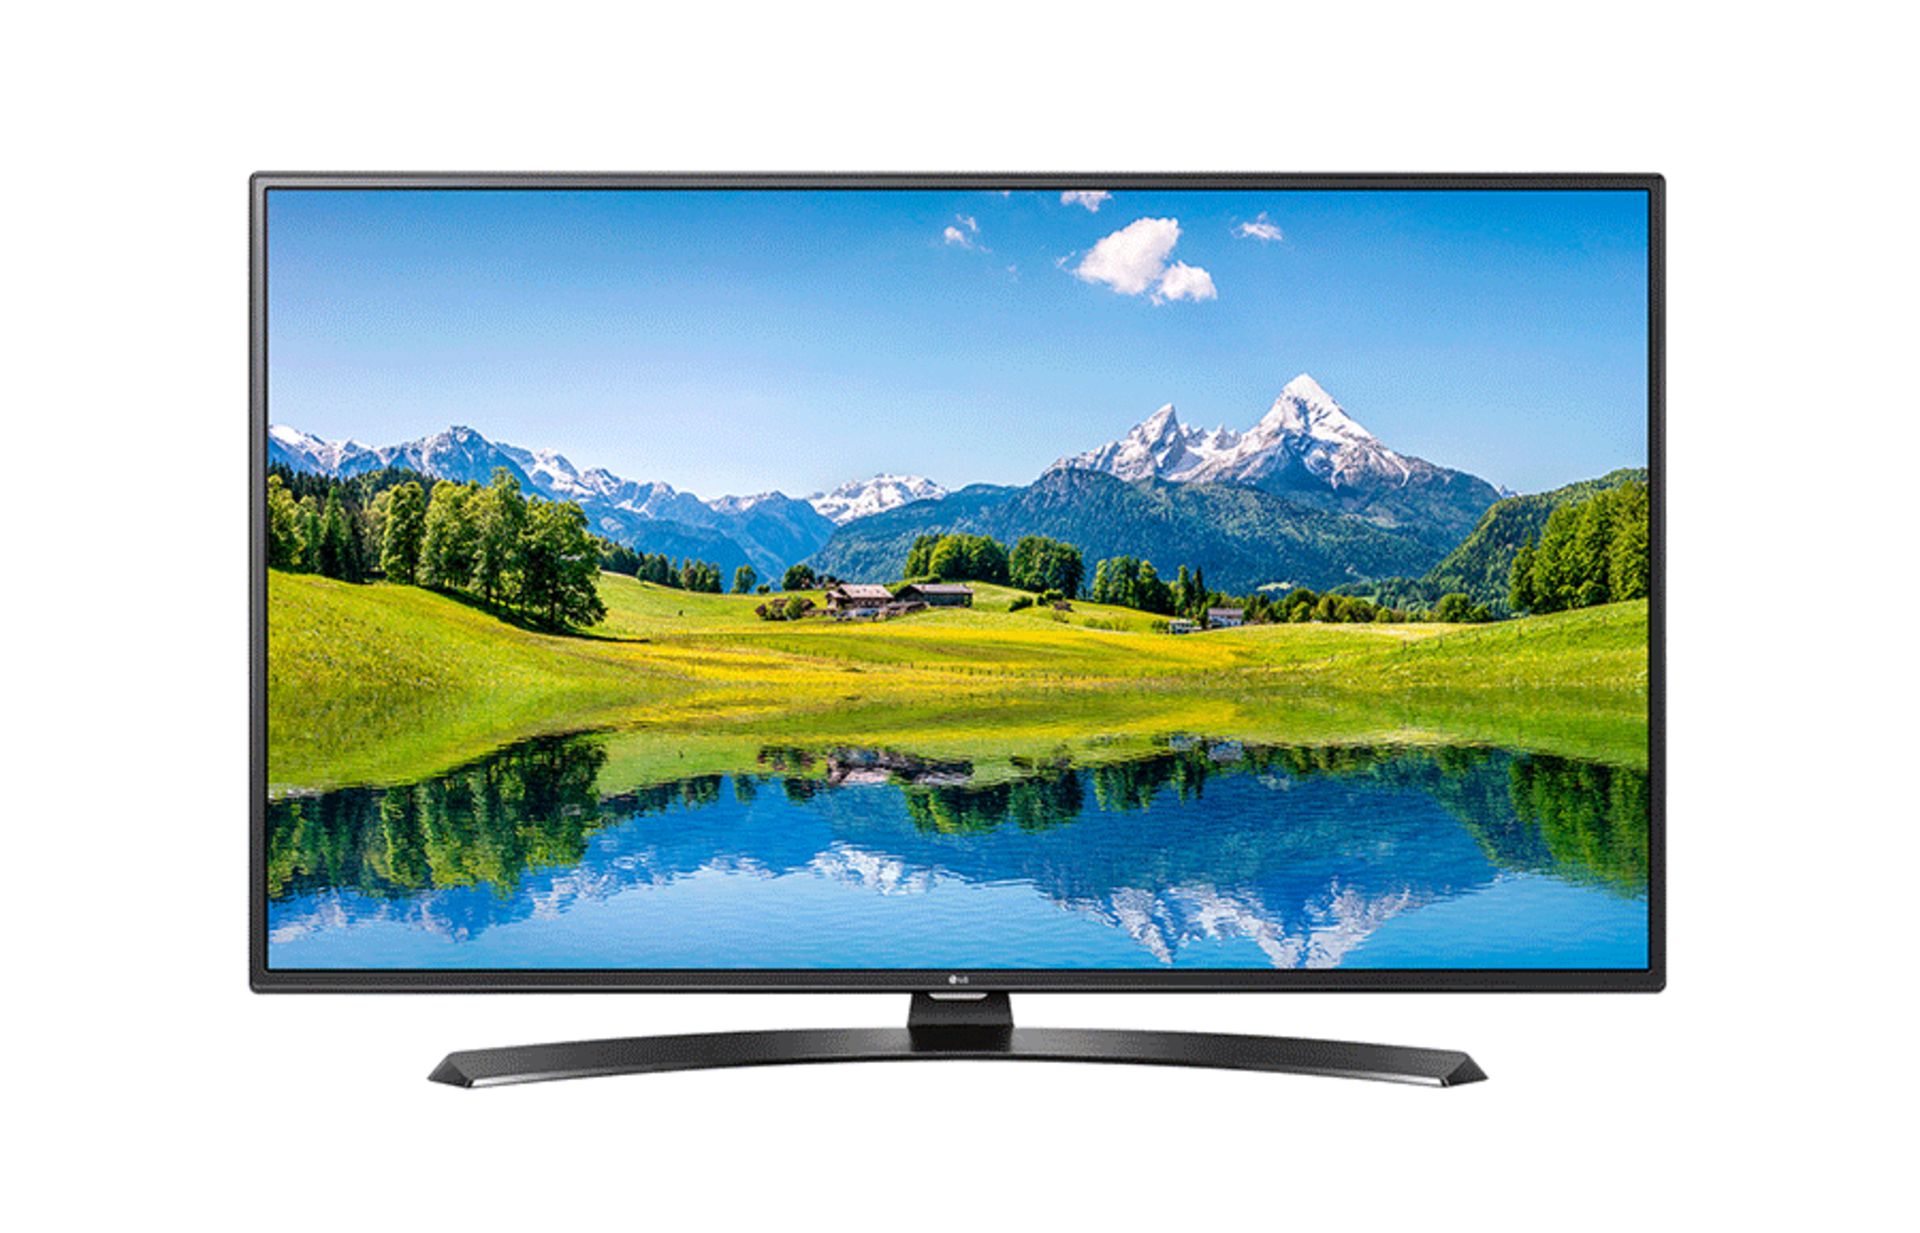 V Grade A LG 49 Inch FULL HD LED SMART TV WITH FREEVIEW HD & WEBOS & WIFI - Model Number 49LH630V